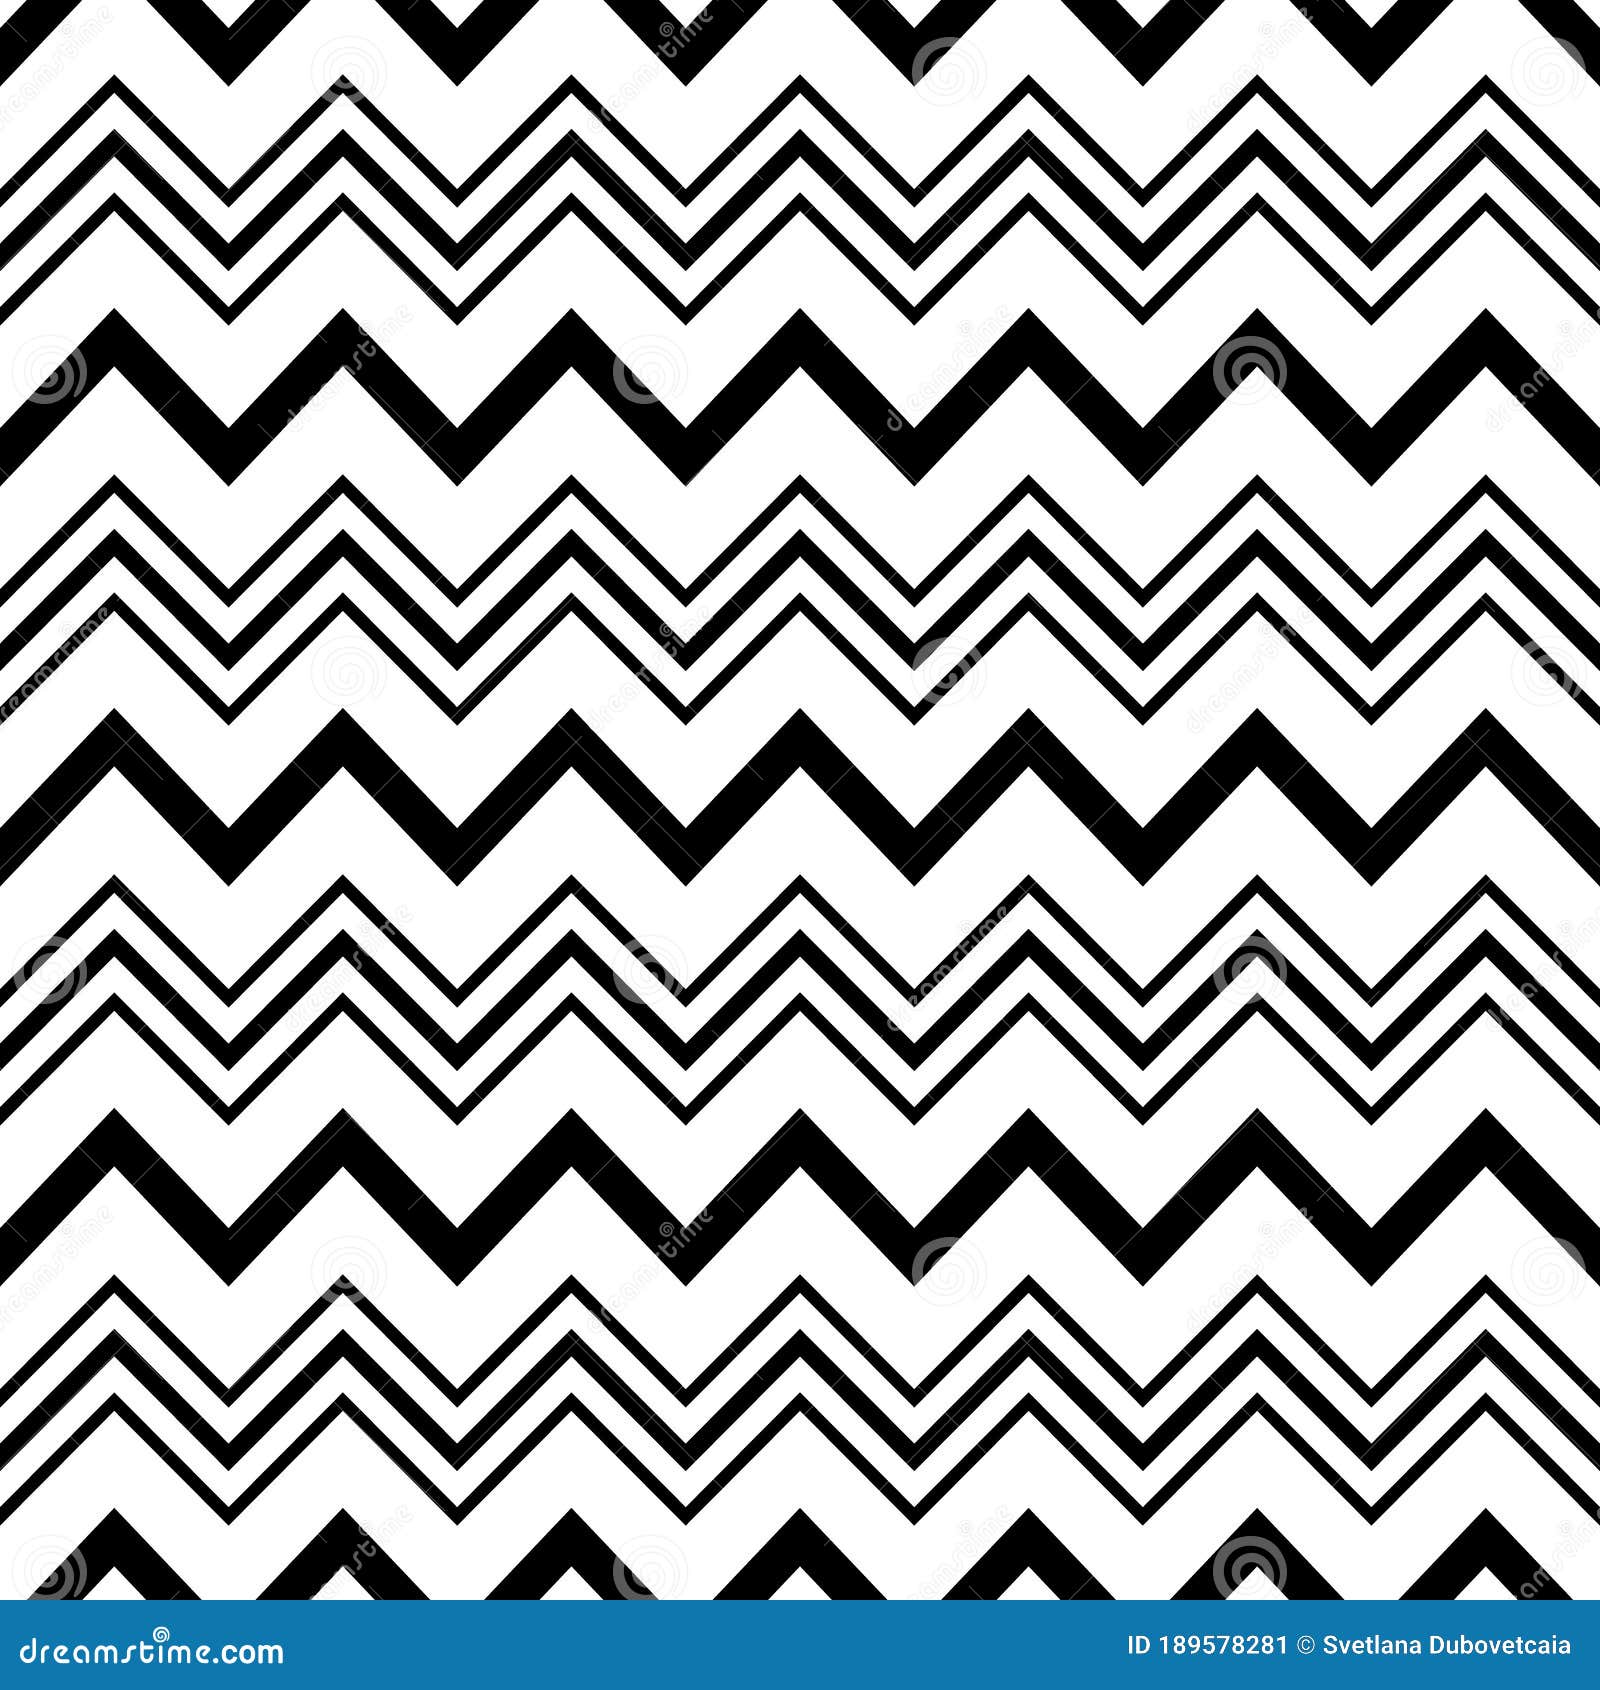 background with chevrons.  seamless pattern. repeating print with chivron. retro style for vintage . simple classic sh